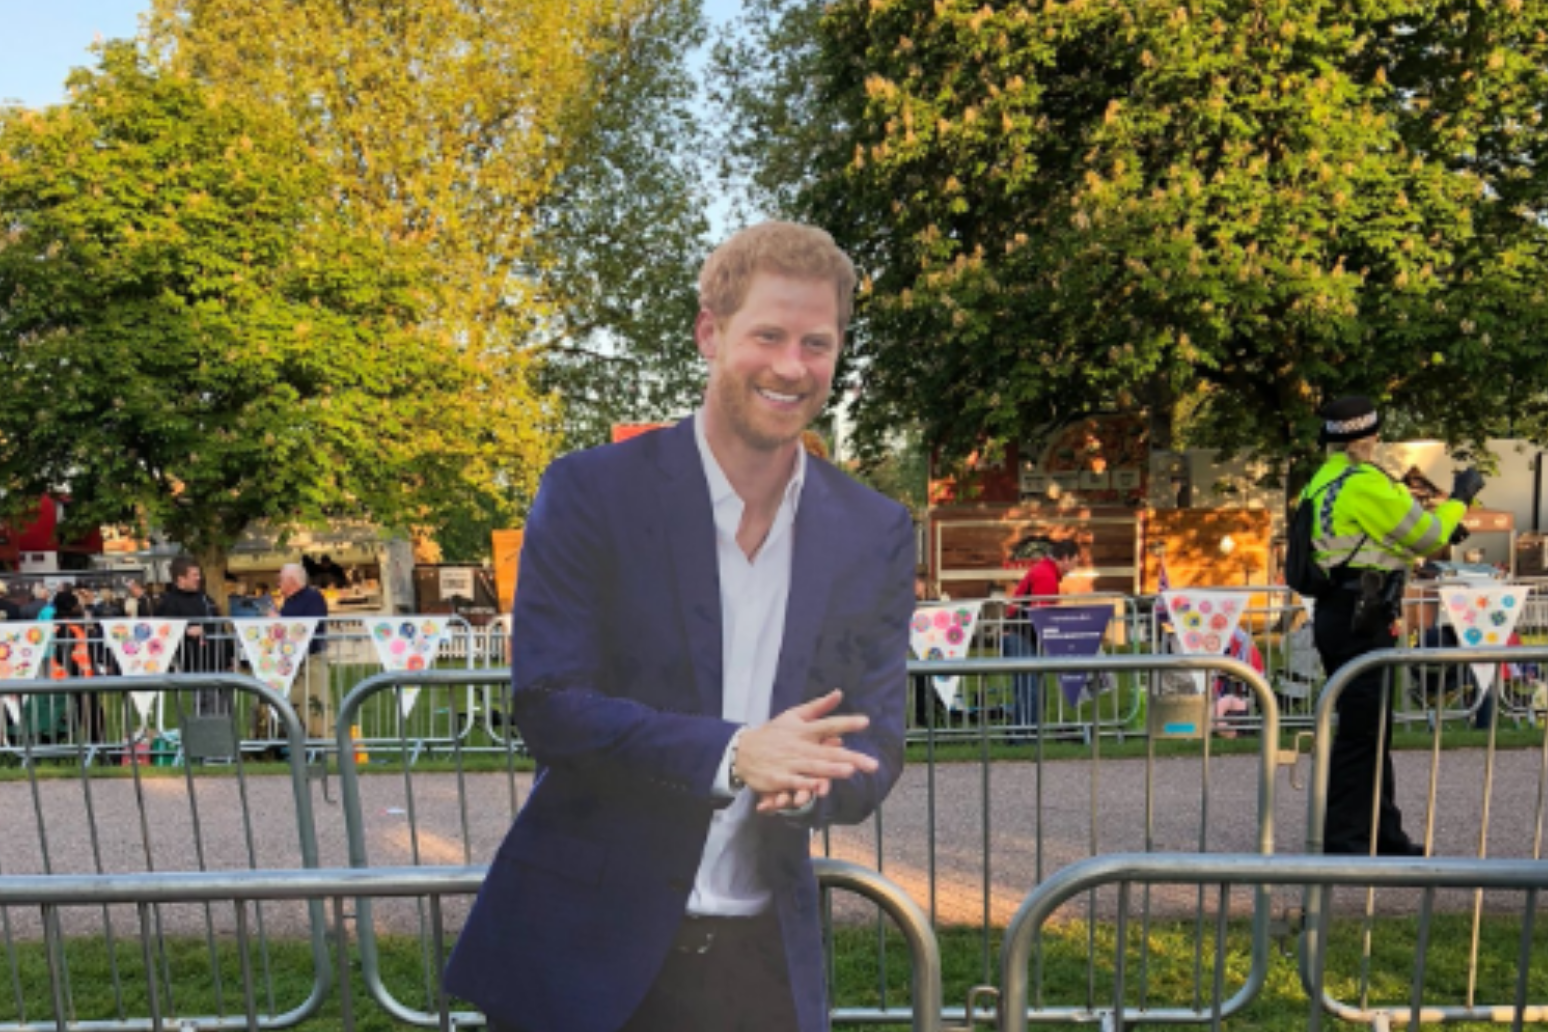 Prince Harry named Duke of Sussex, Meghan Markle to be a duchess - Buckingham Palace 